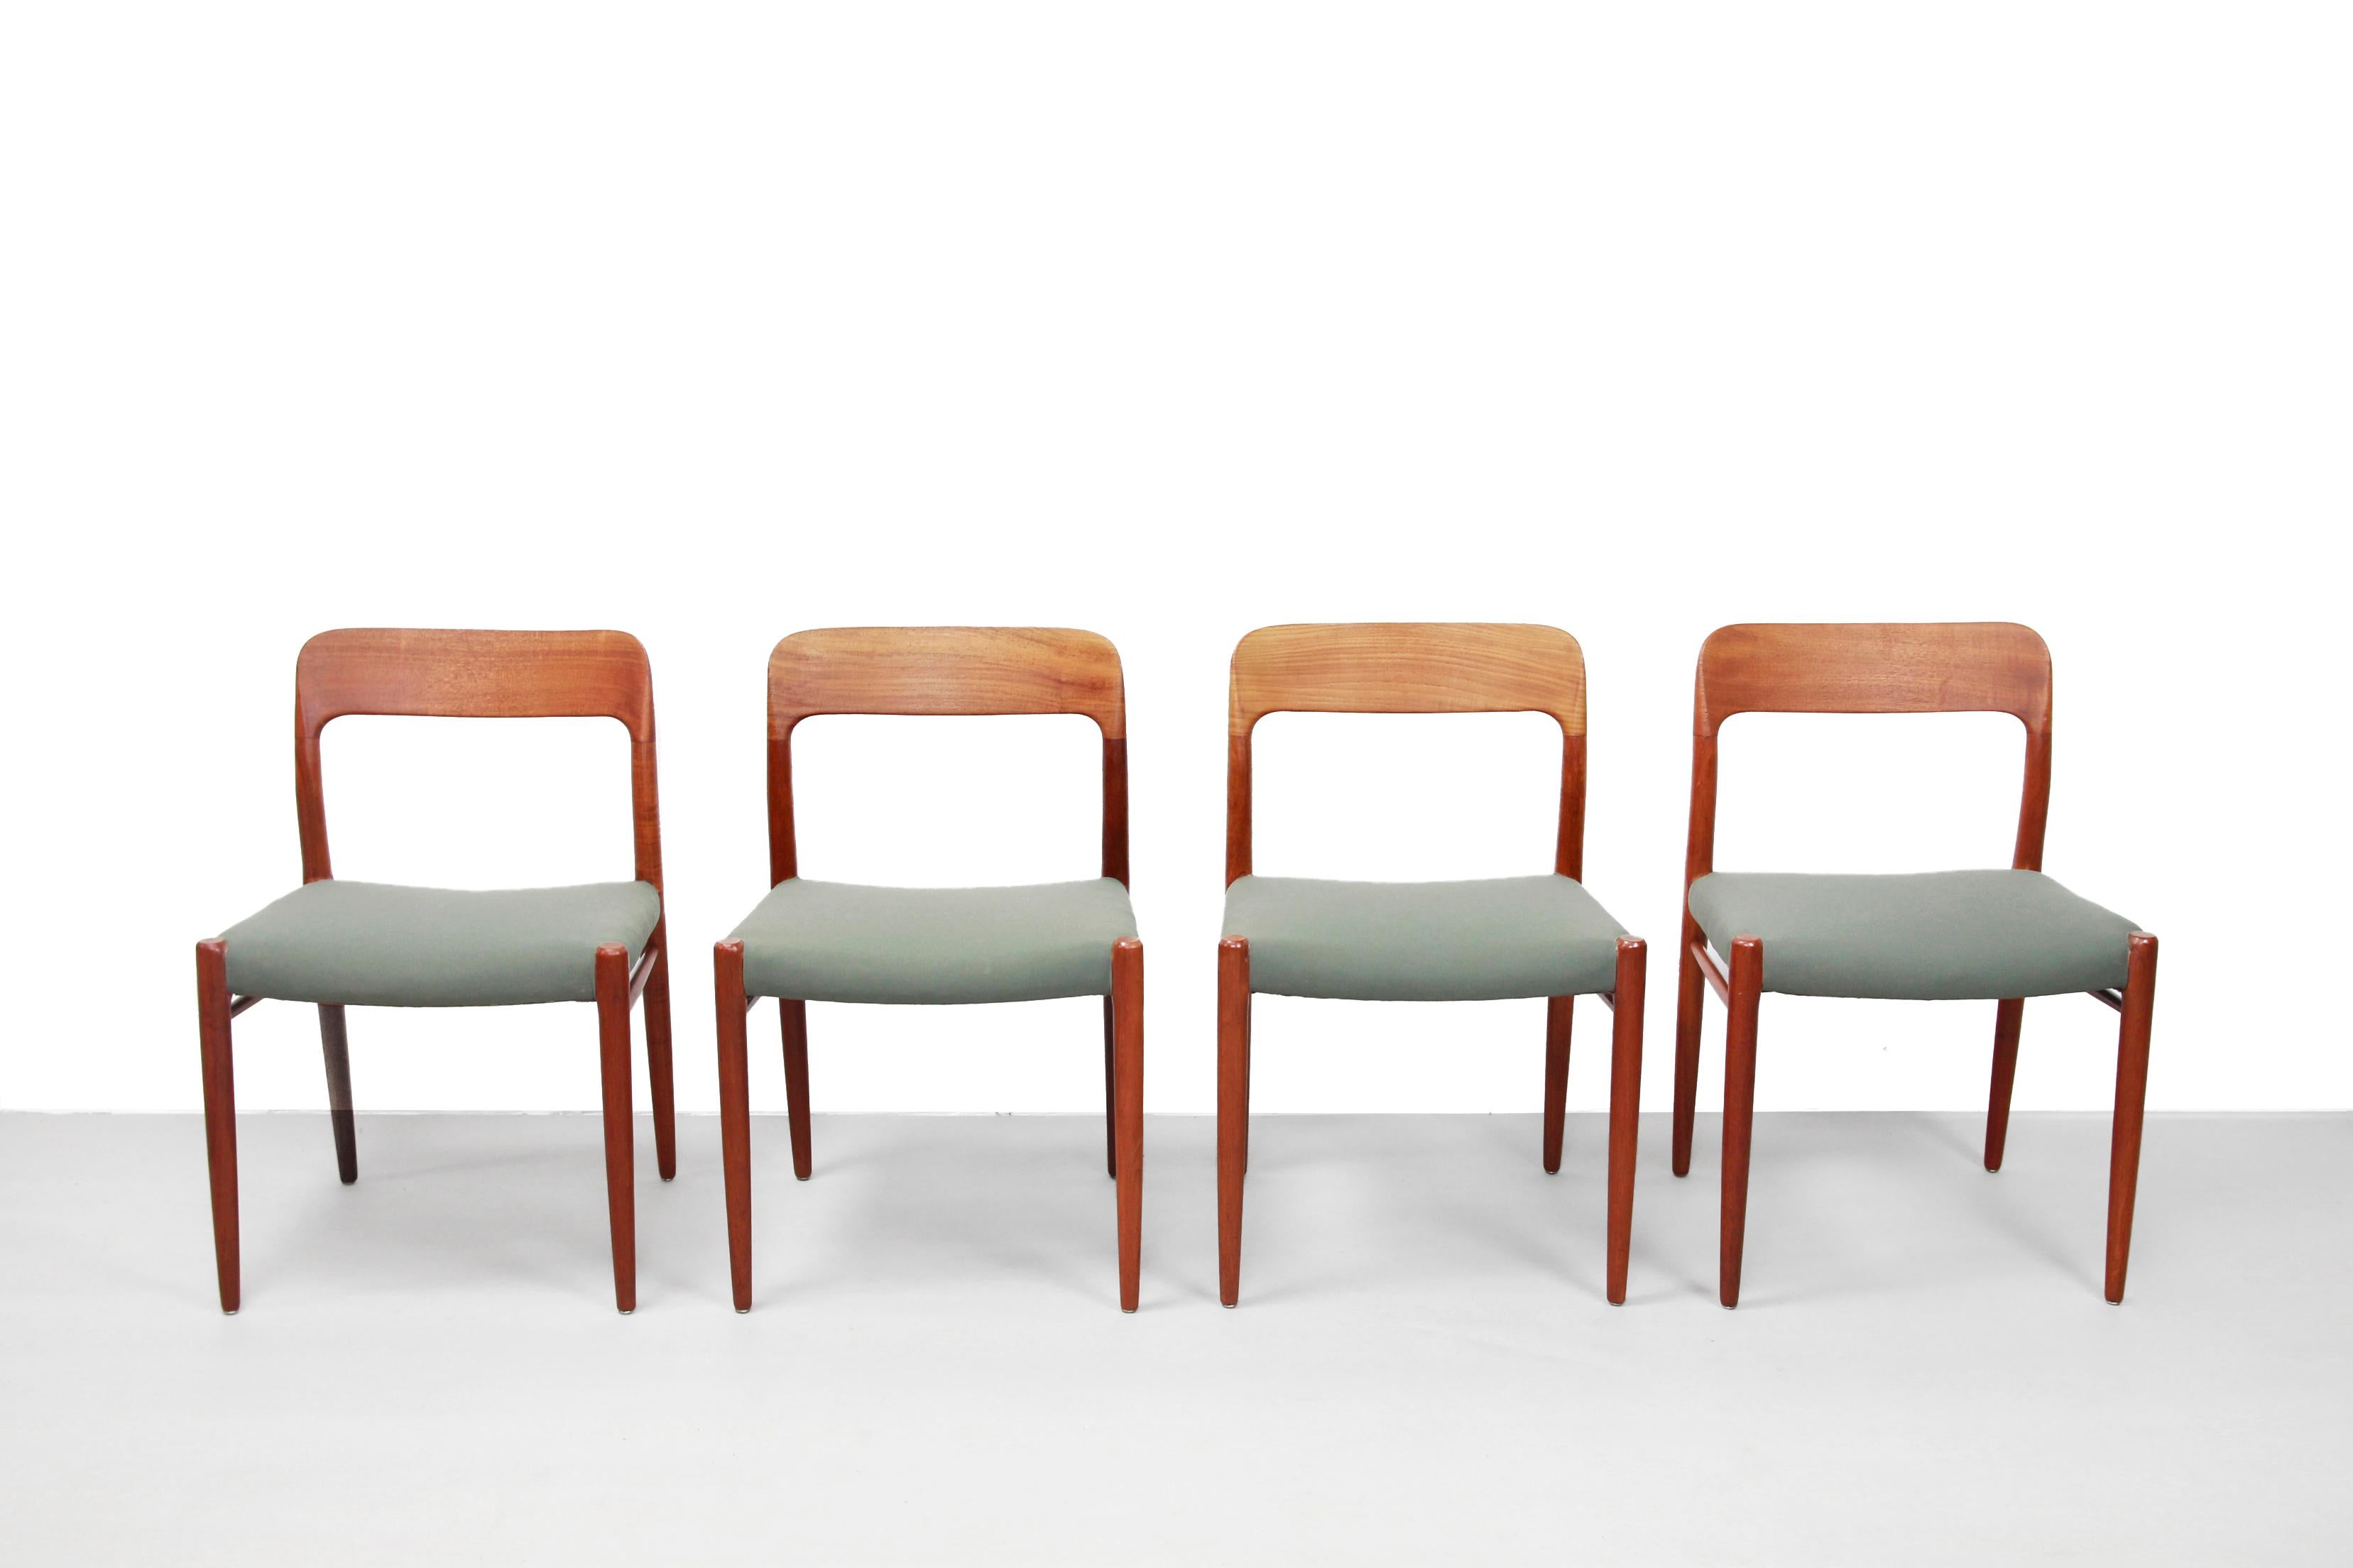 Very nice set of four dining room chairs designed by Niels Møller. Niels Møller is known in Denmark for quality and craftsmanship and that is very evident in this model, 